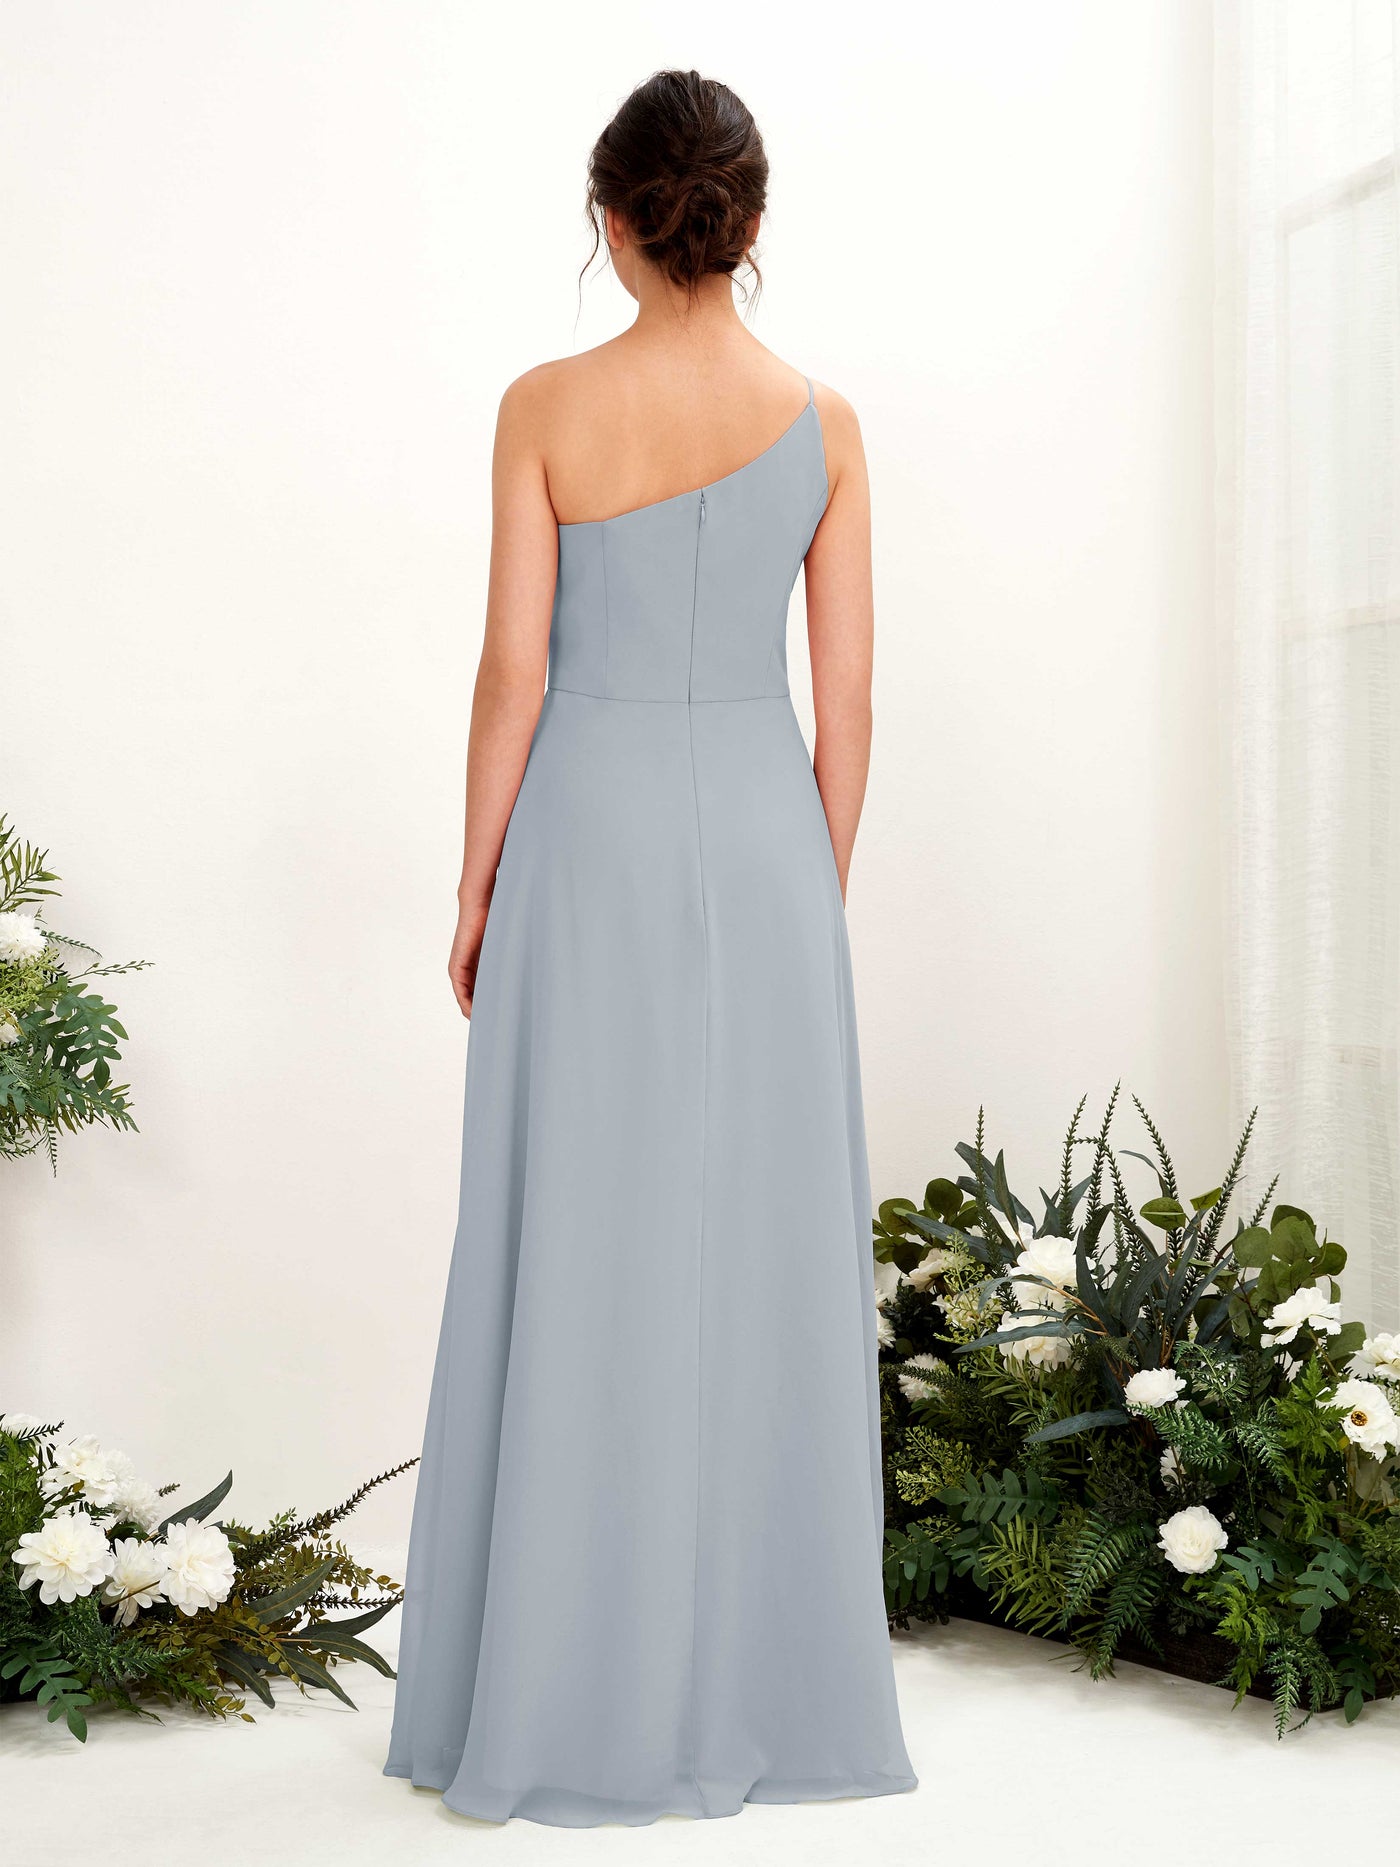 Dusty Blue-Upgrade Bridesmaid Dresses Bridesmaid Dress A-line Chiffon One Shoulder Full Length Sleeveless Wedding Party Dress (81225704)#color_dusty-blue-upgrade